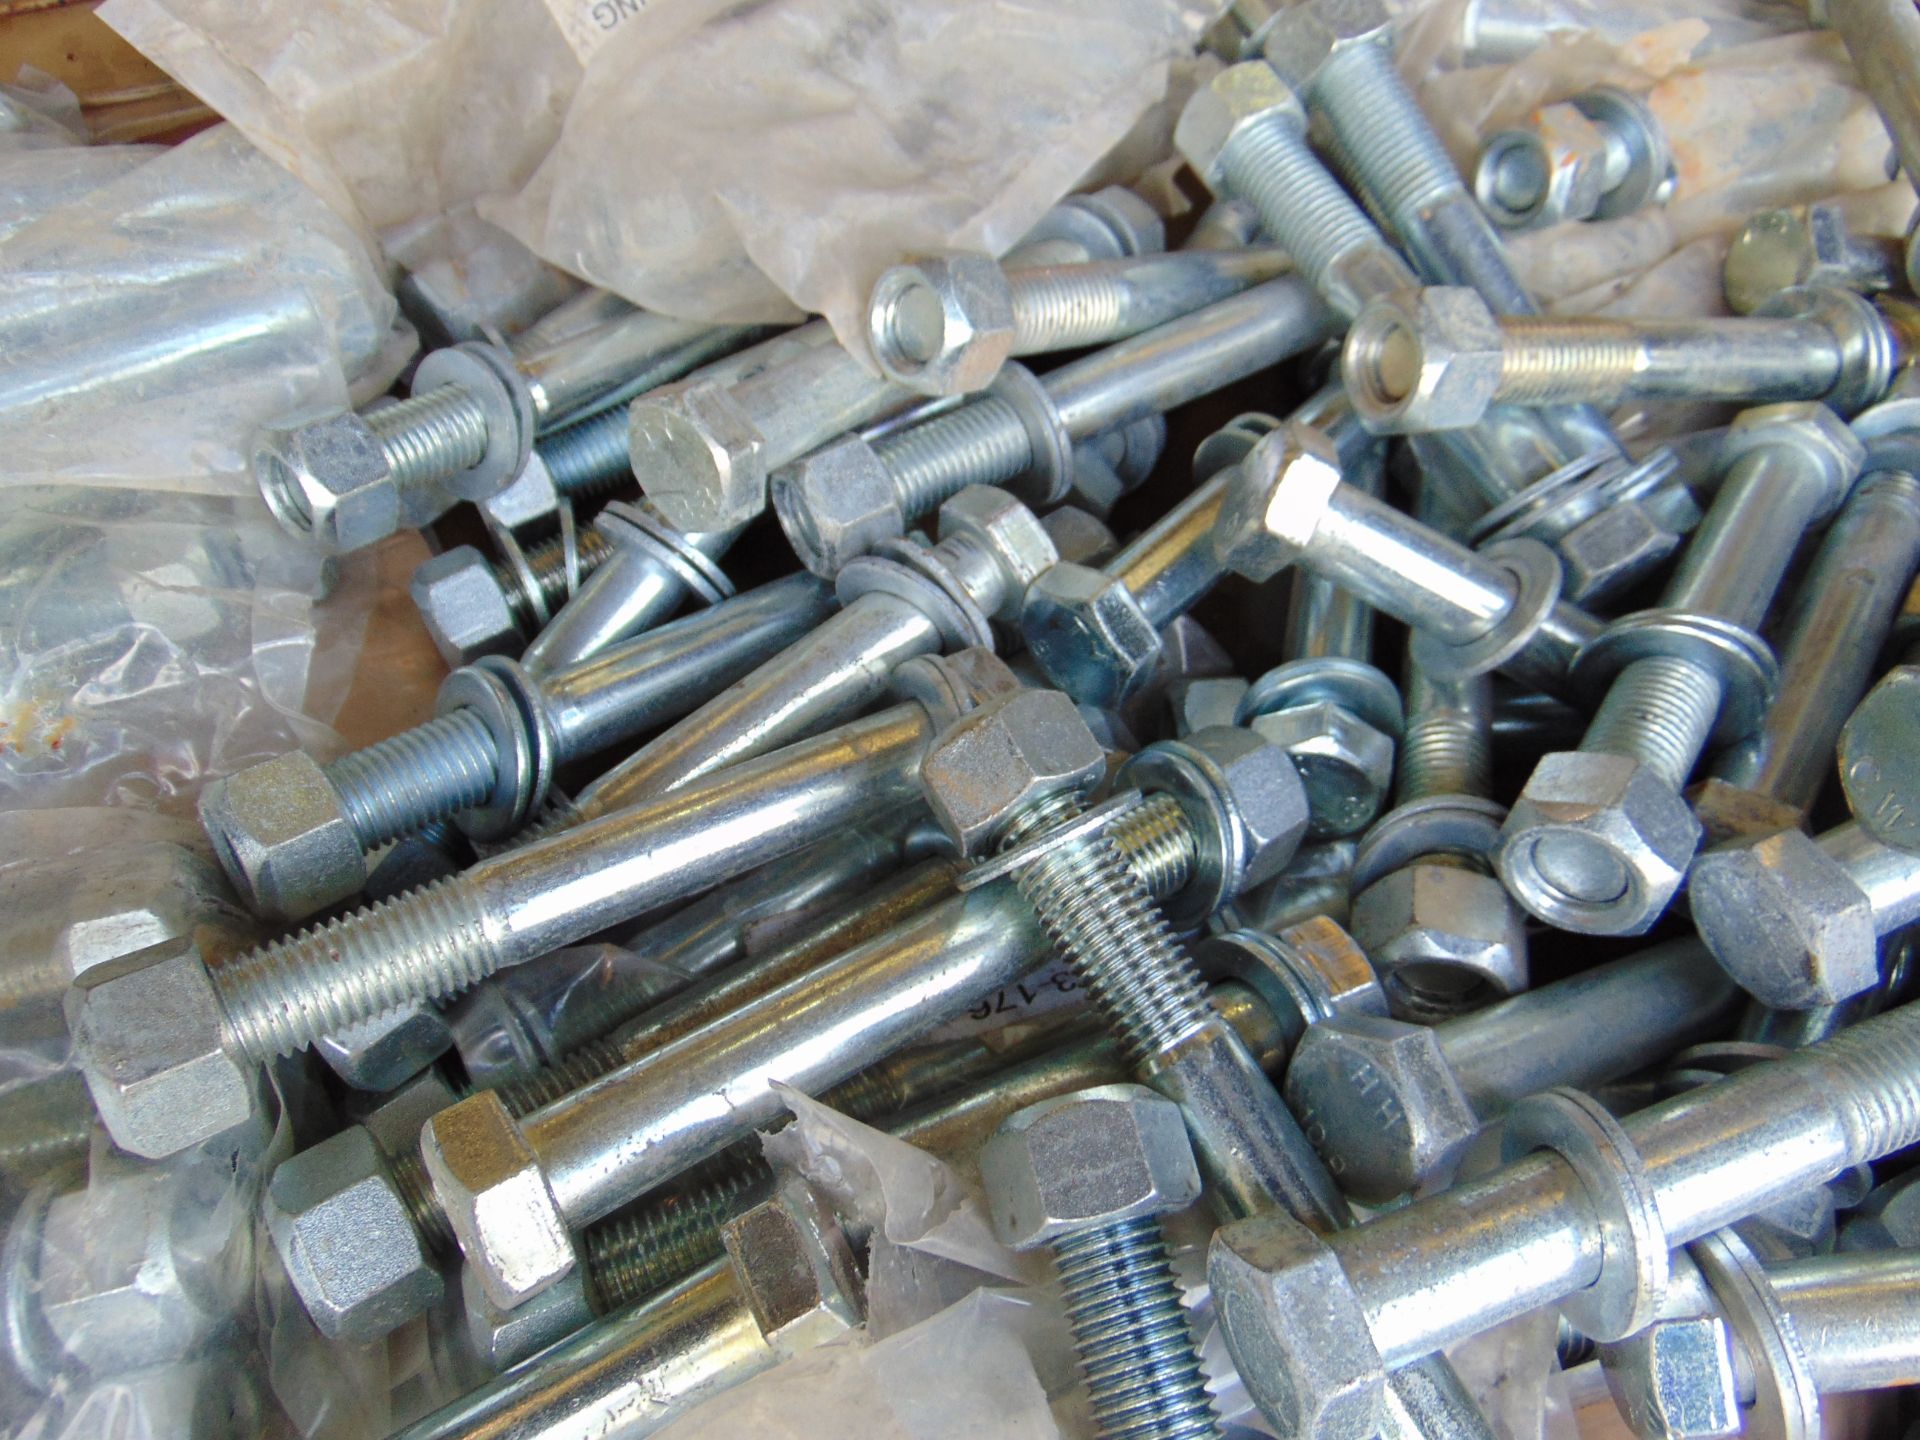 Approx. 250 M20 x 150 Grade 8.8 Bolts, Washers & Nuts - Image 4 of 4